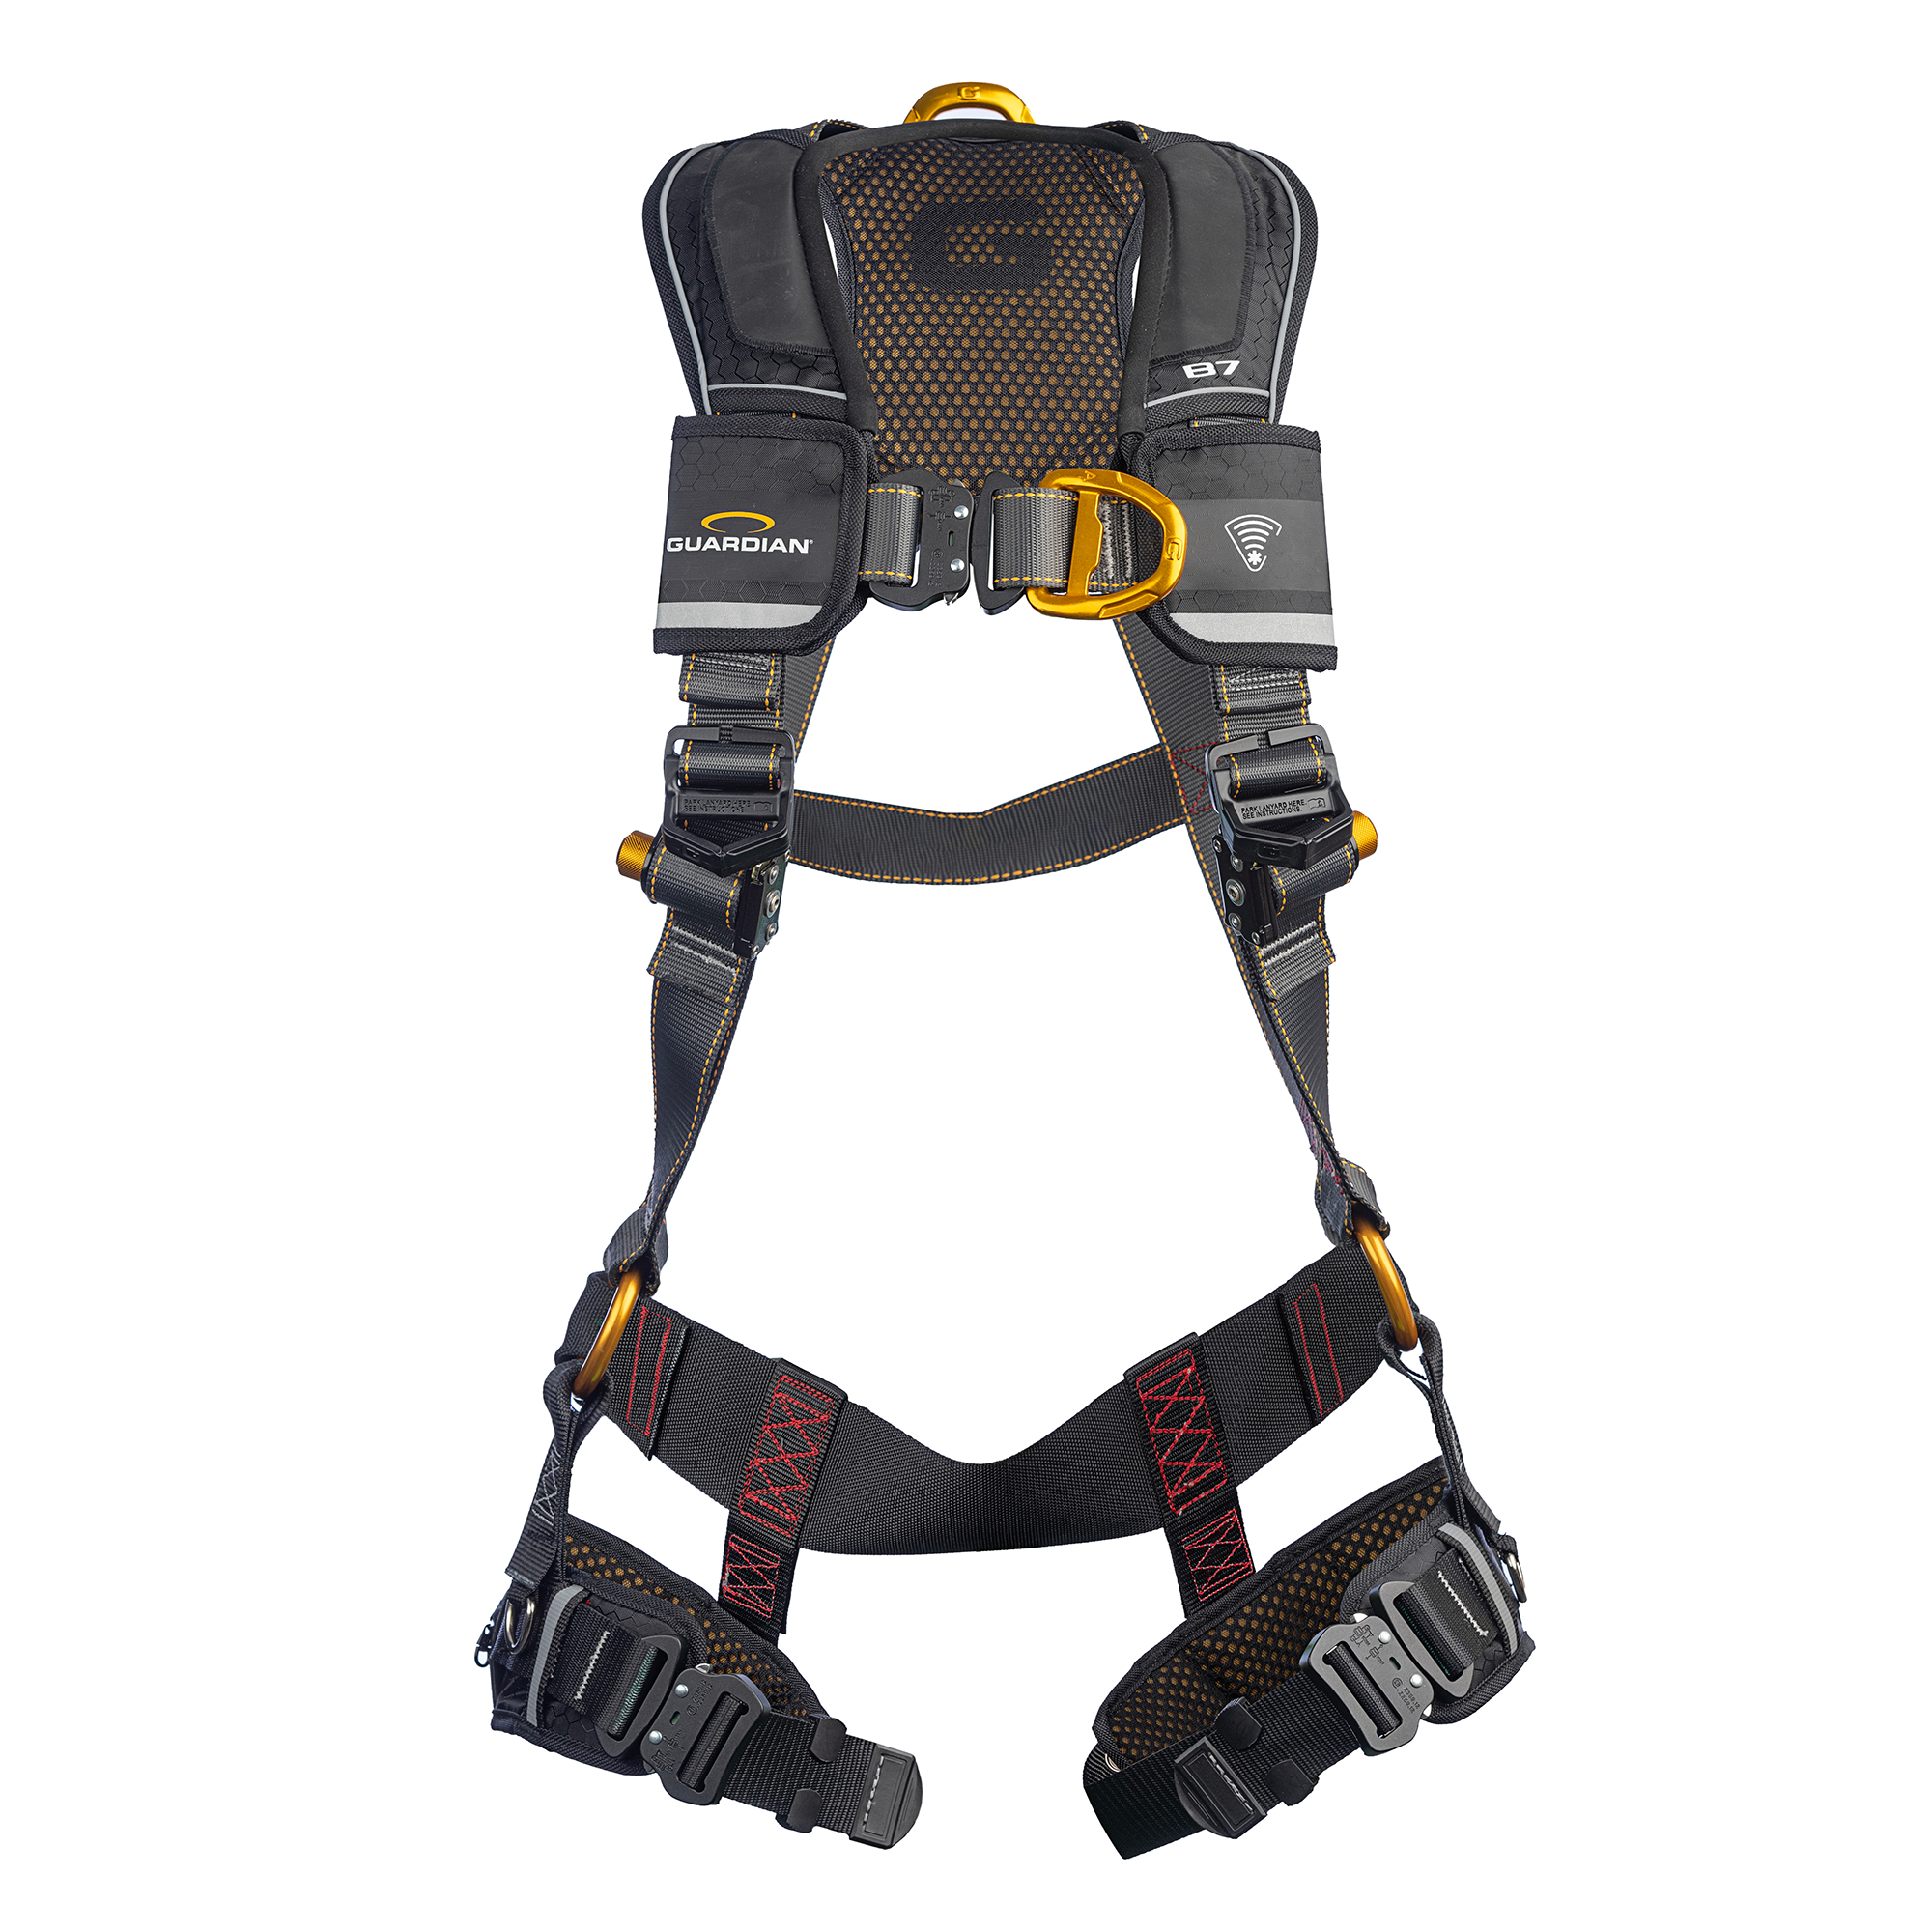 https://www.engineeredfallprotection.com/store/images/thumbs/0002705_guardian-b7-comfort-full-body-harness-quick-connect-chest-and-legs-sternal-d-ring.png